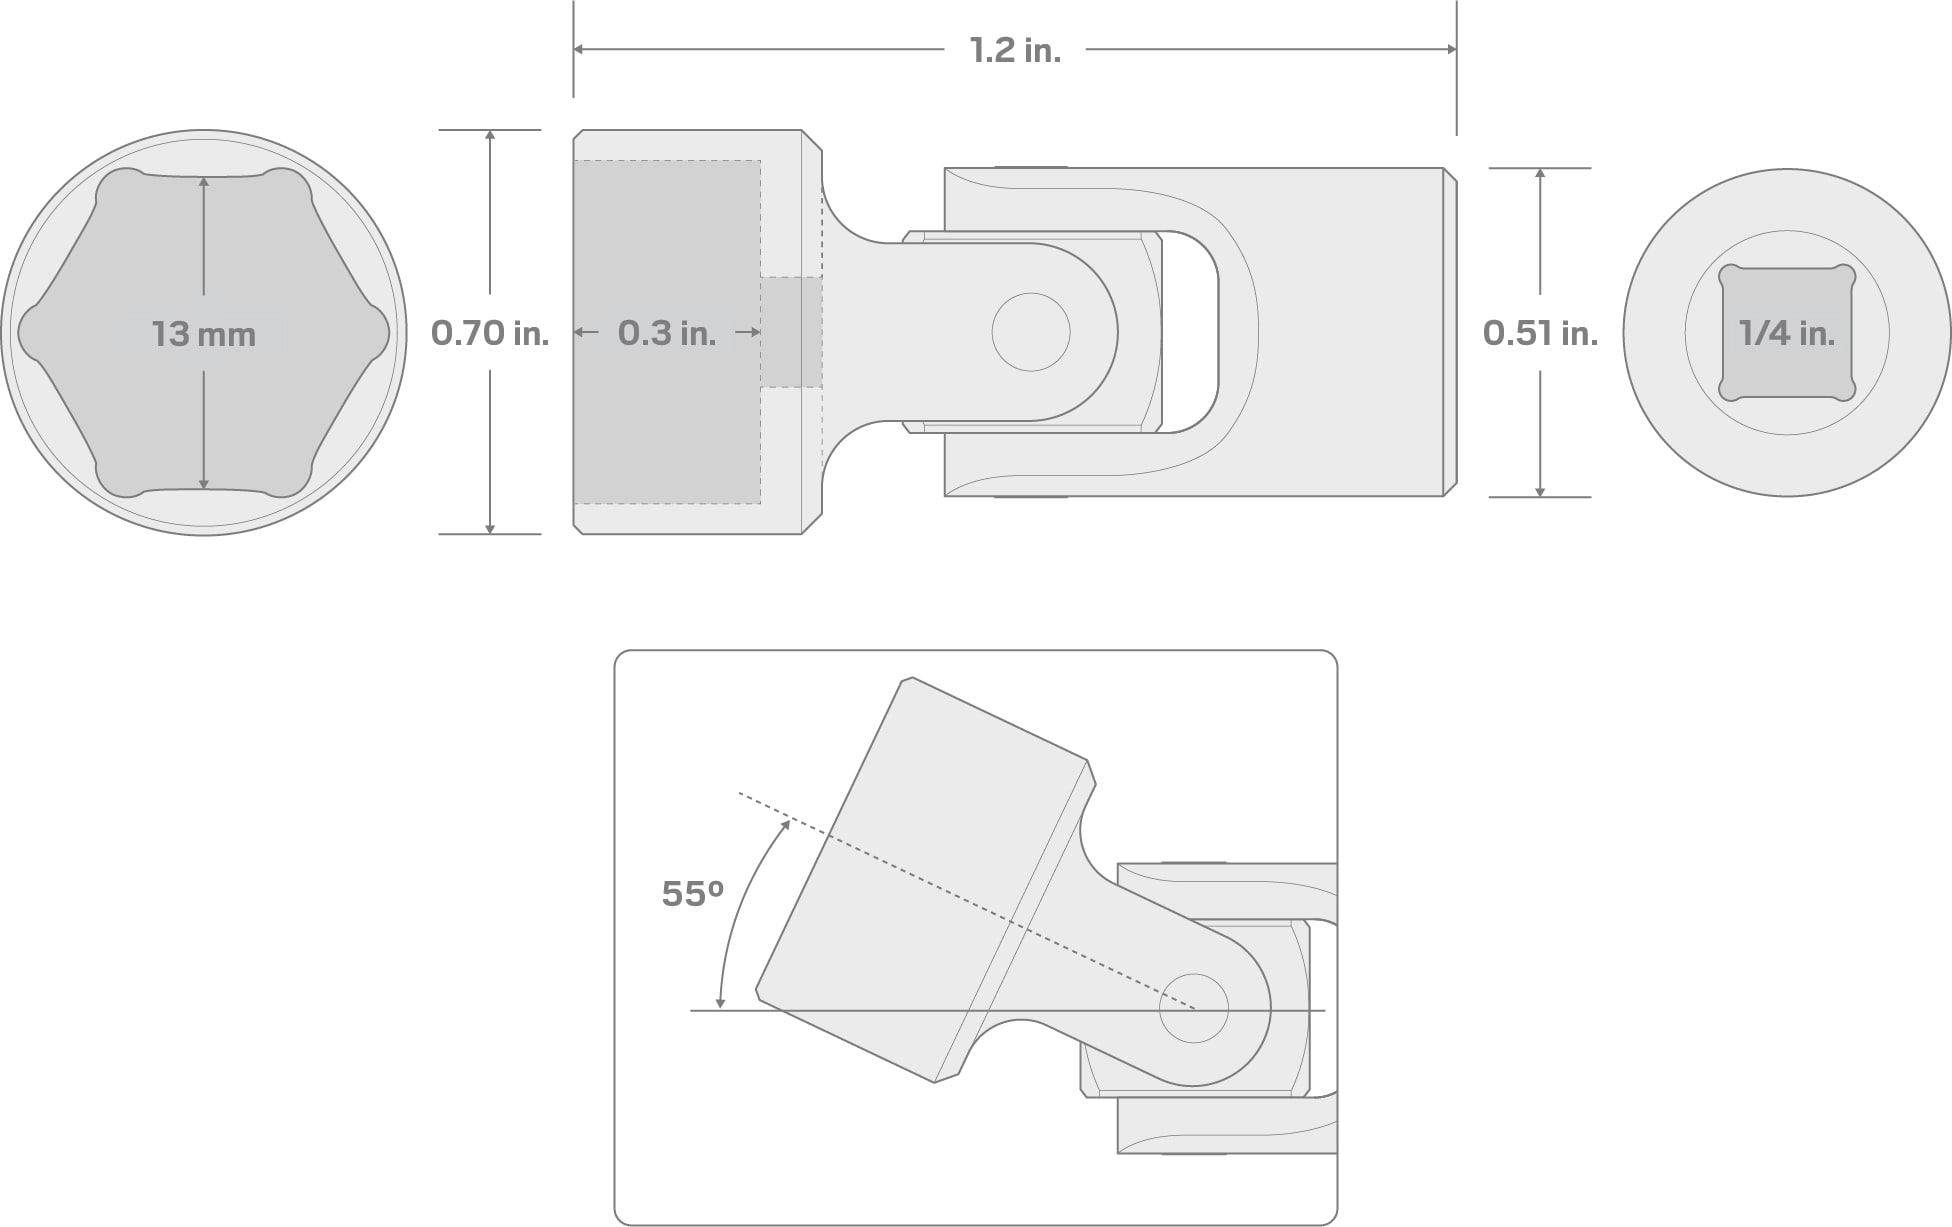 Specs for 1/4 Inch Drive x 13 mm Universal Joint Socket